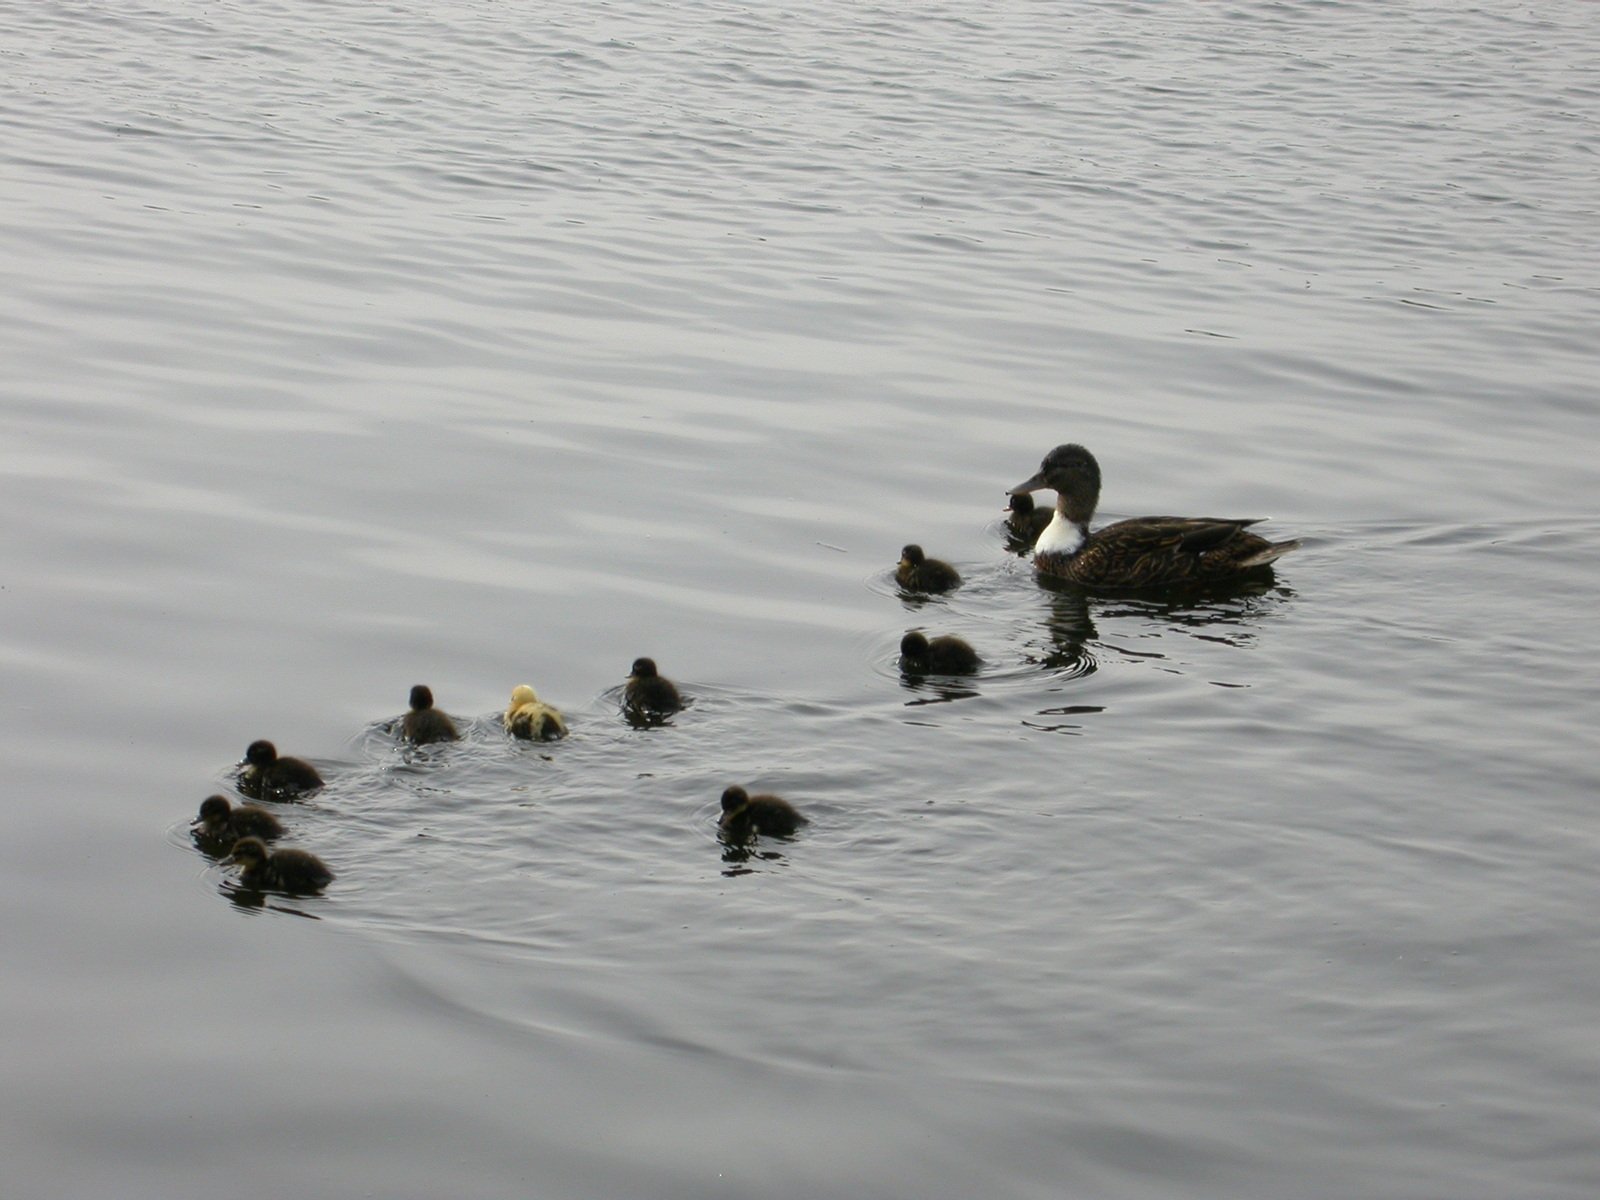 a mother duck with her ducklings swimming in the water